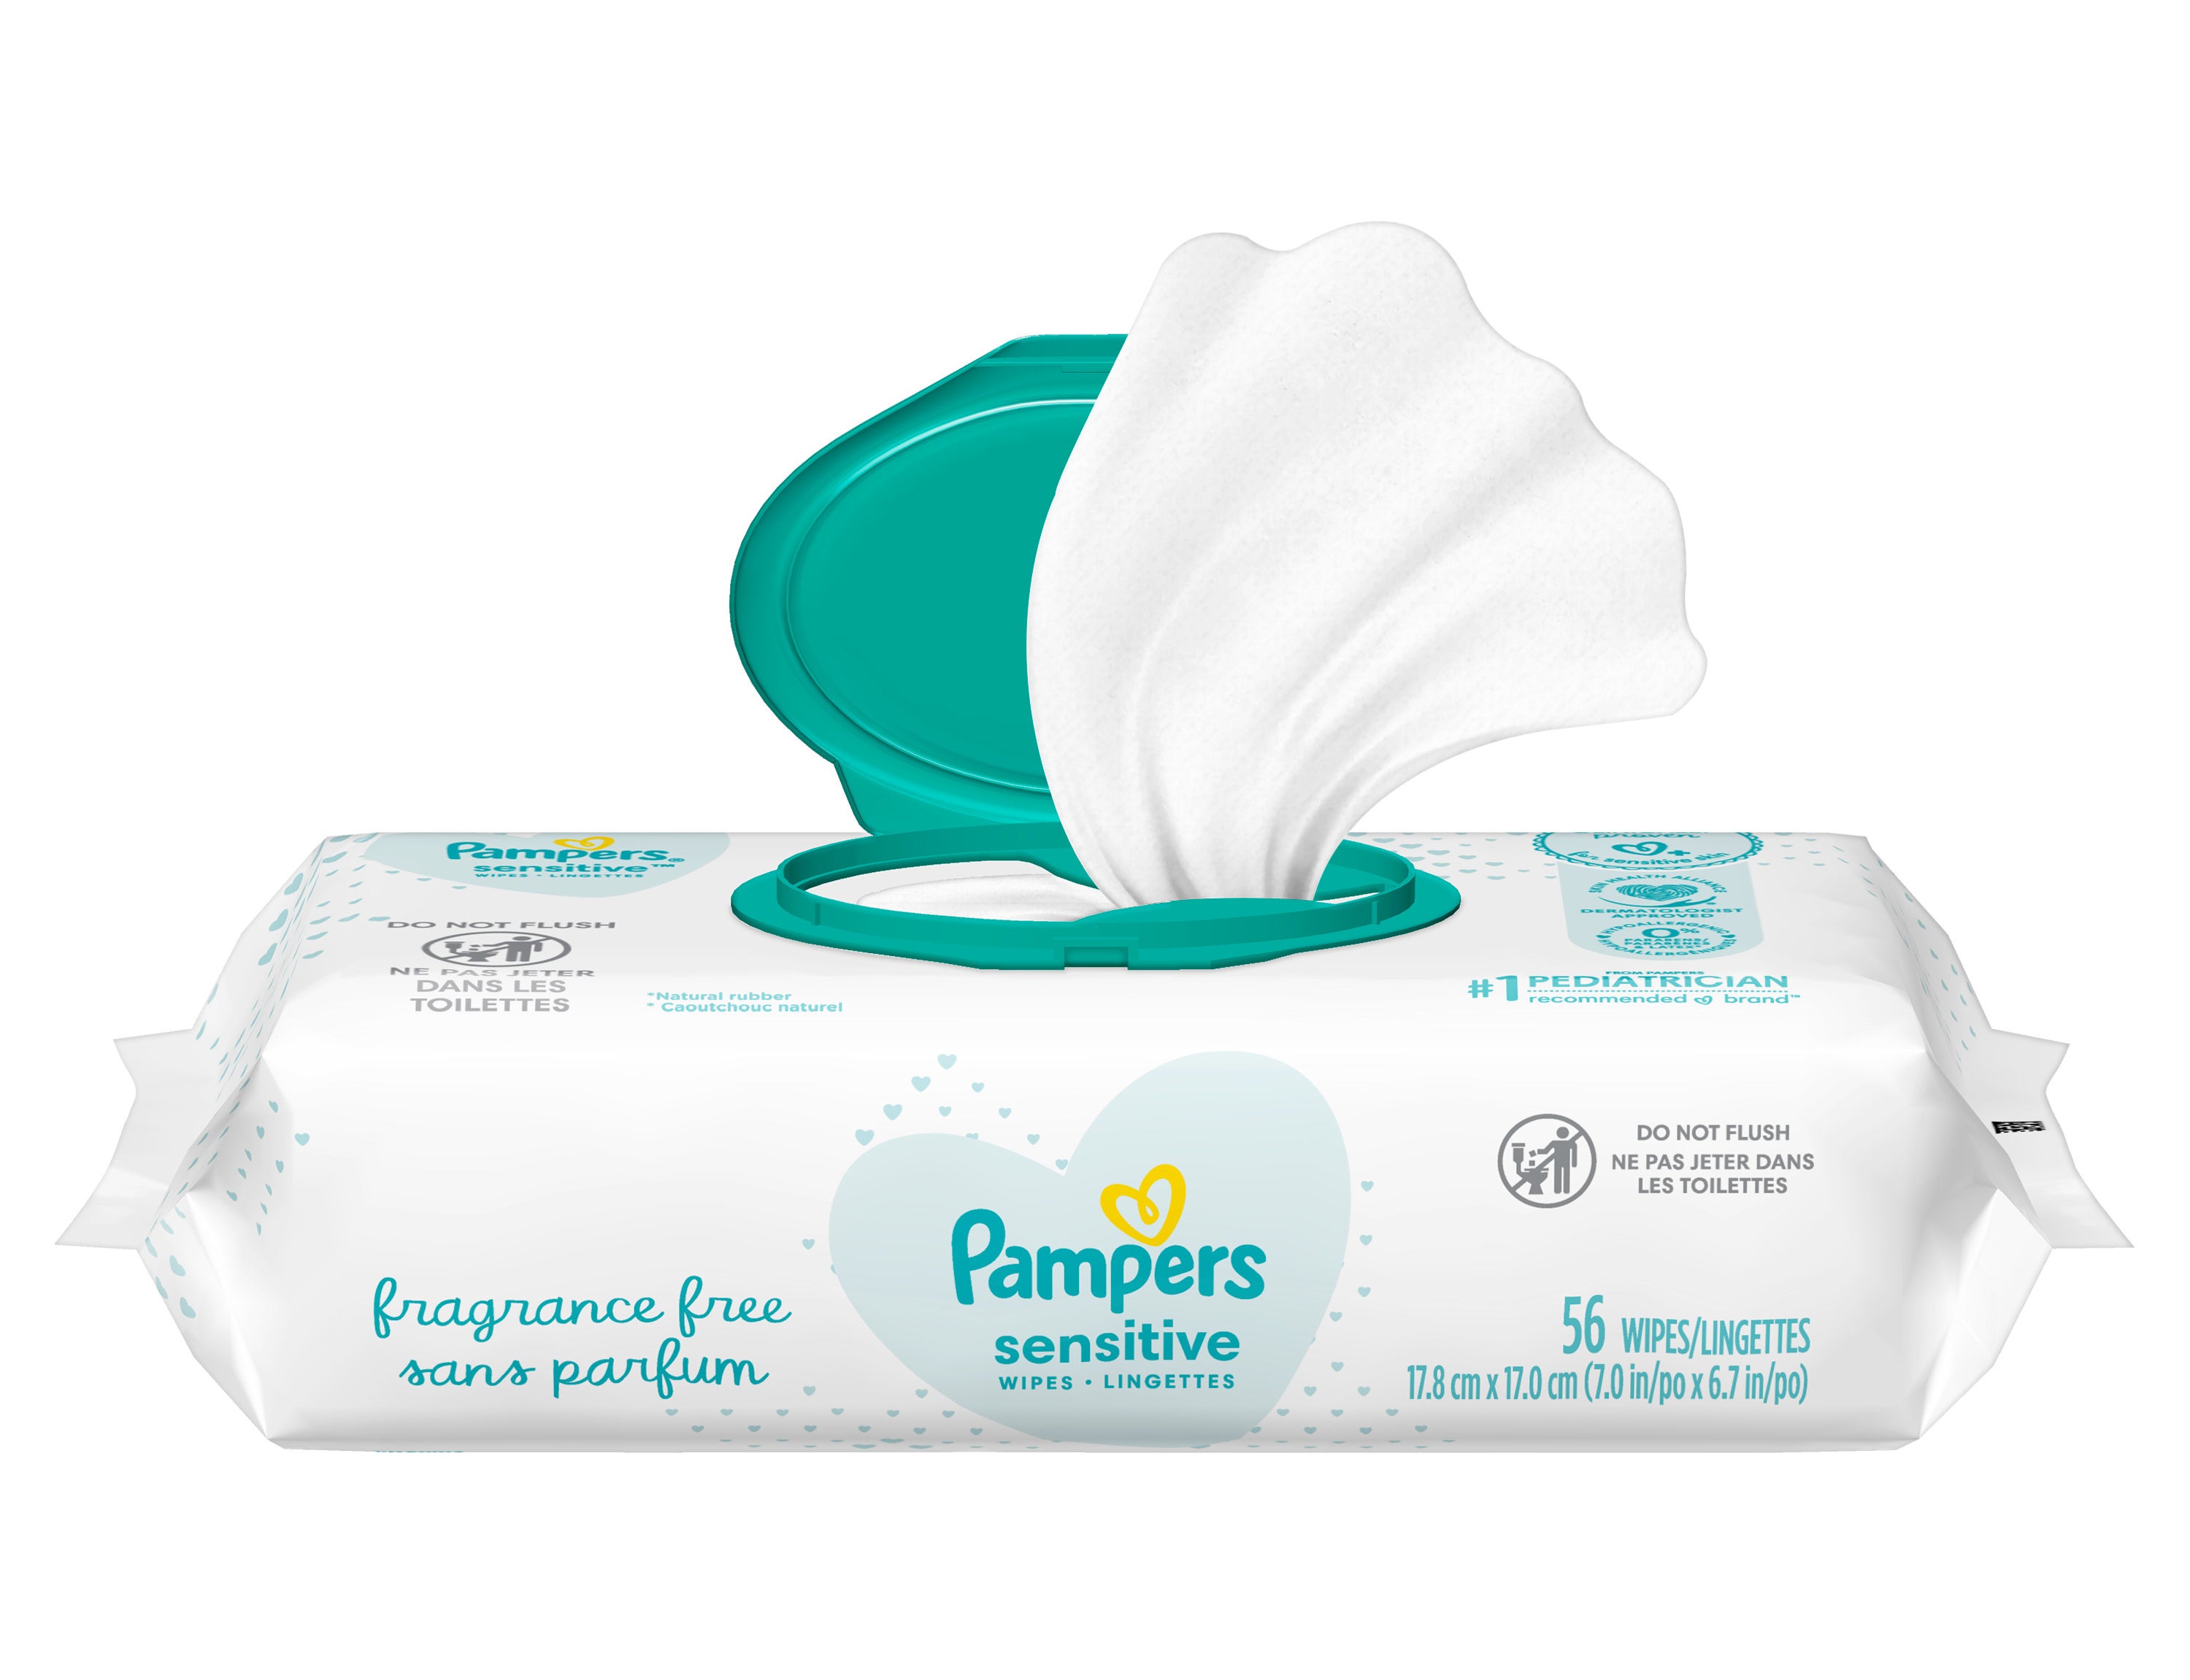 A package of Pampers Sensitive Wipes